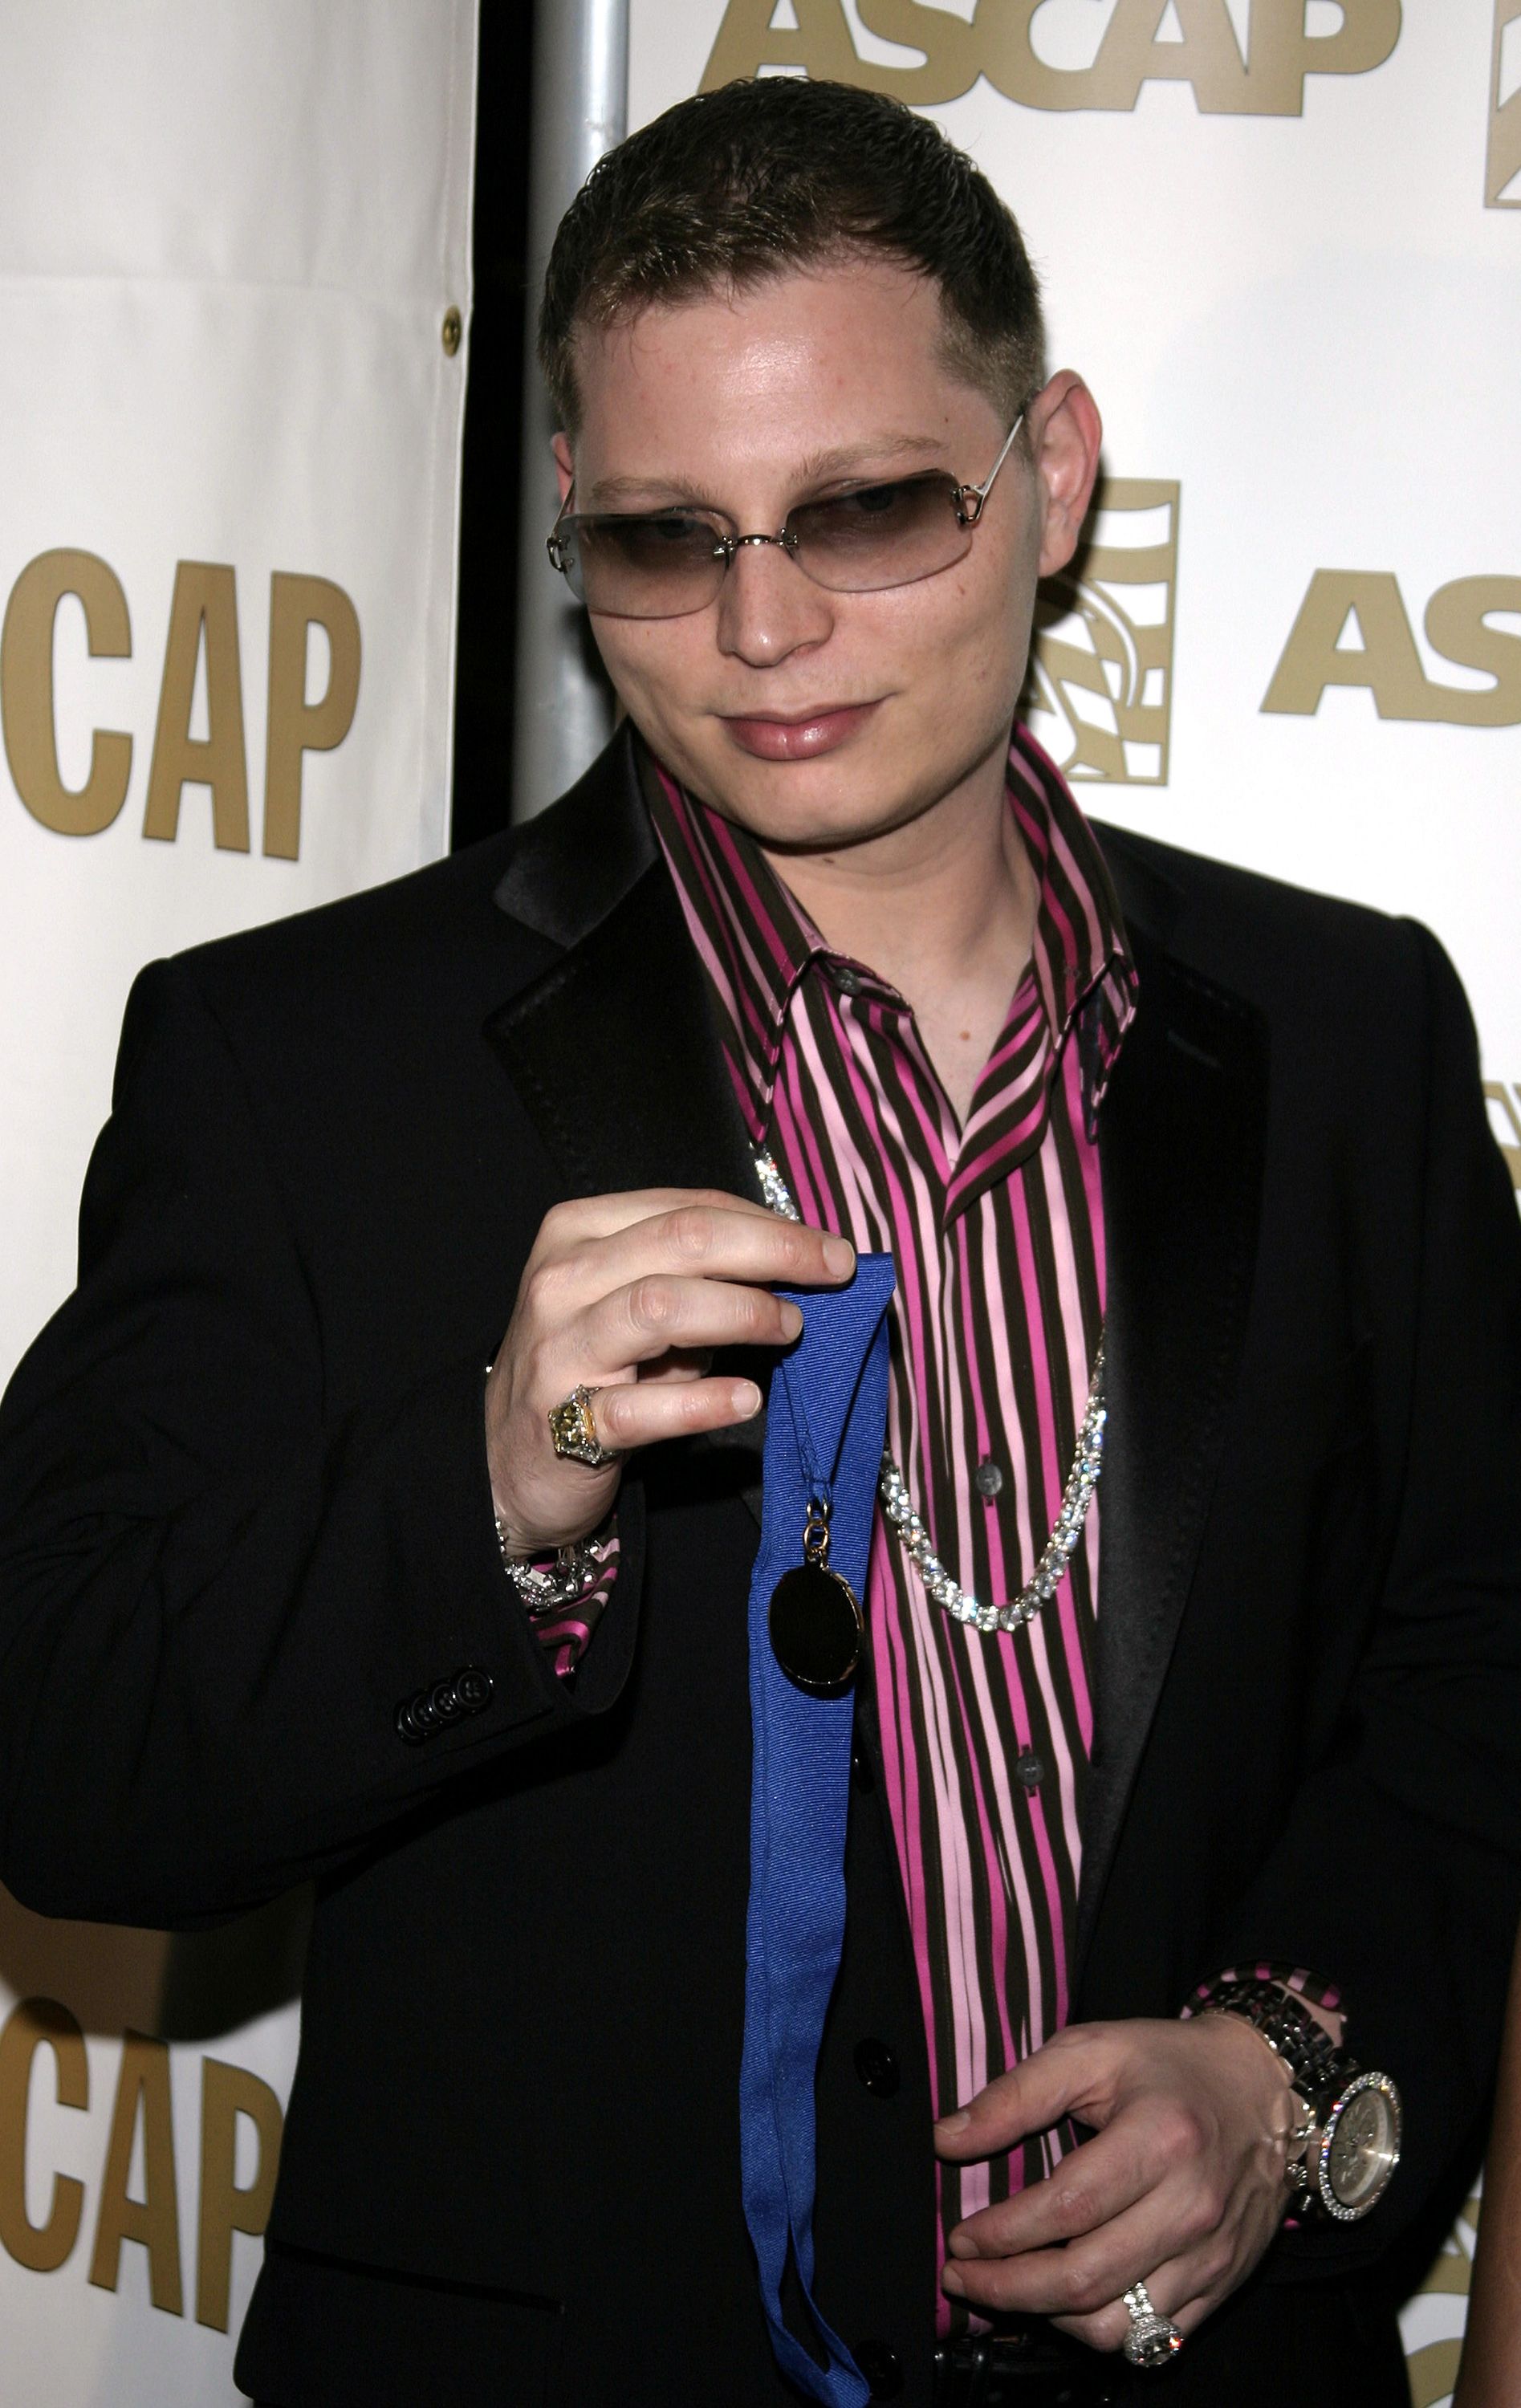 Scott Storch holds up medal at Ascap event. 